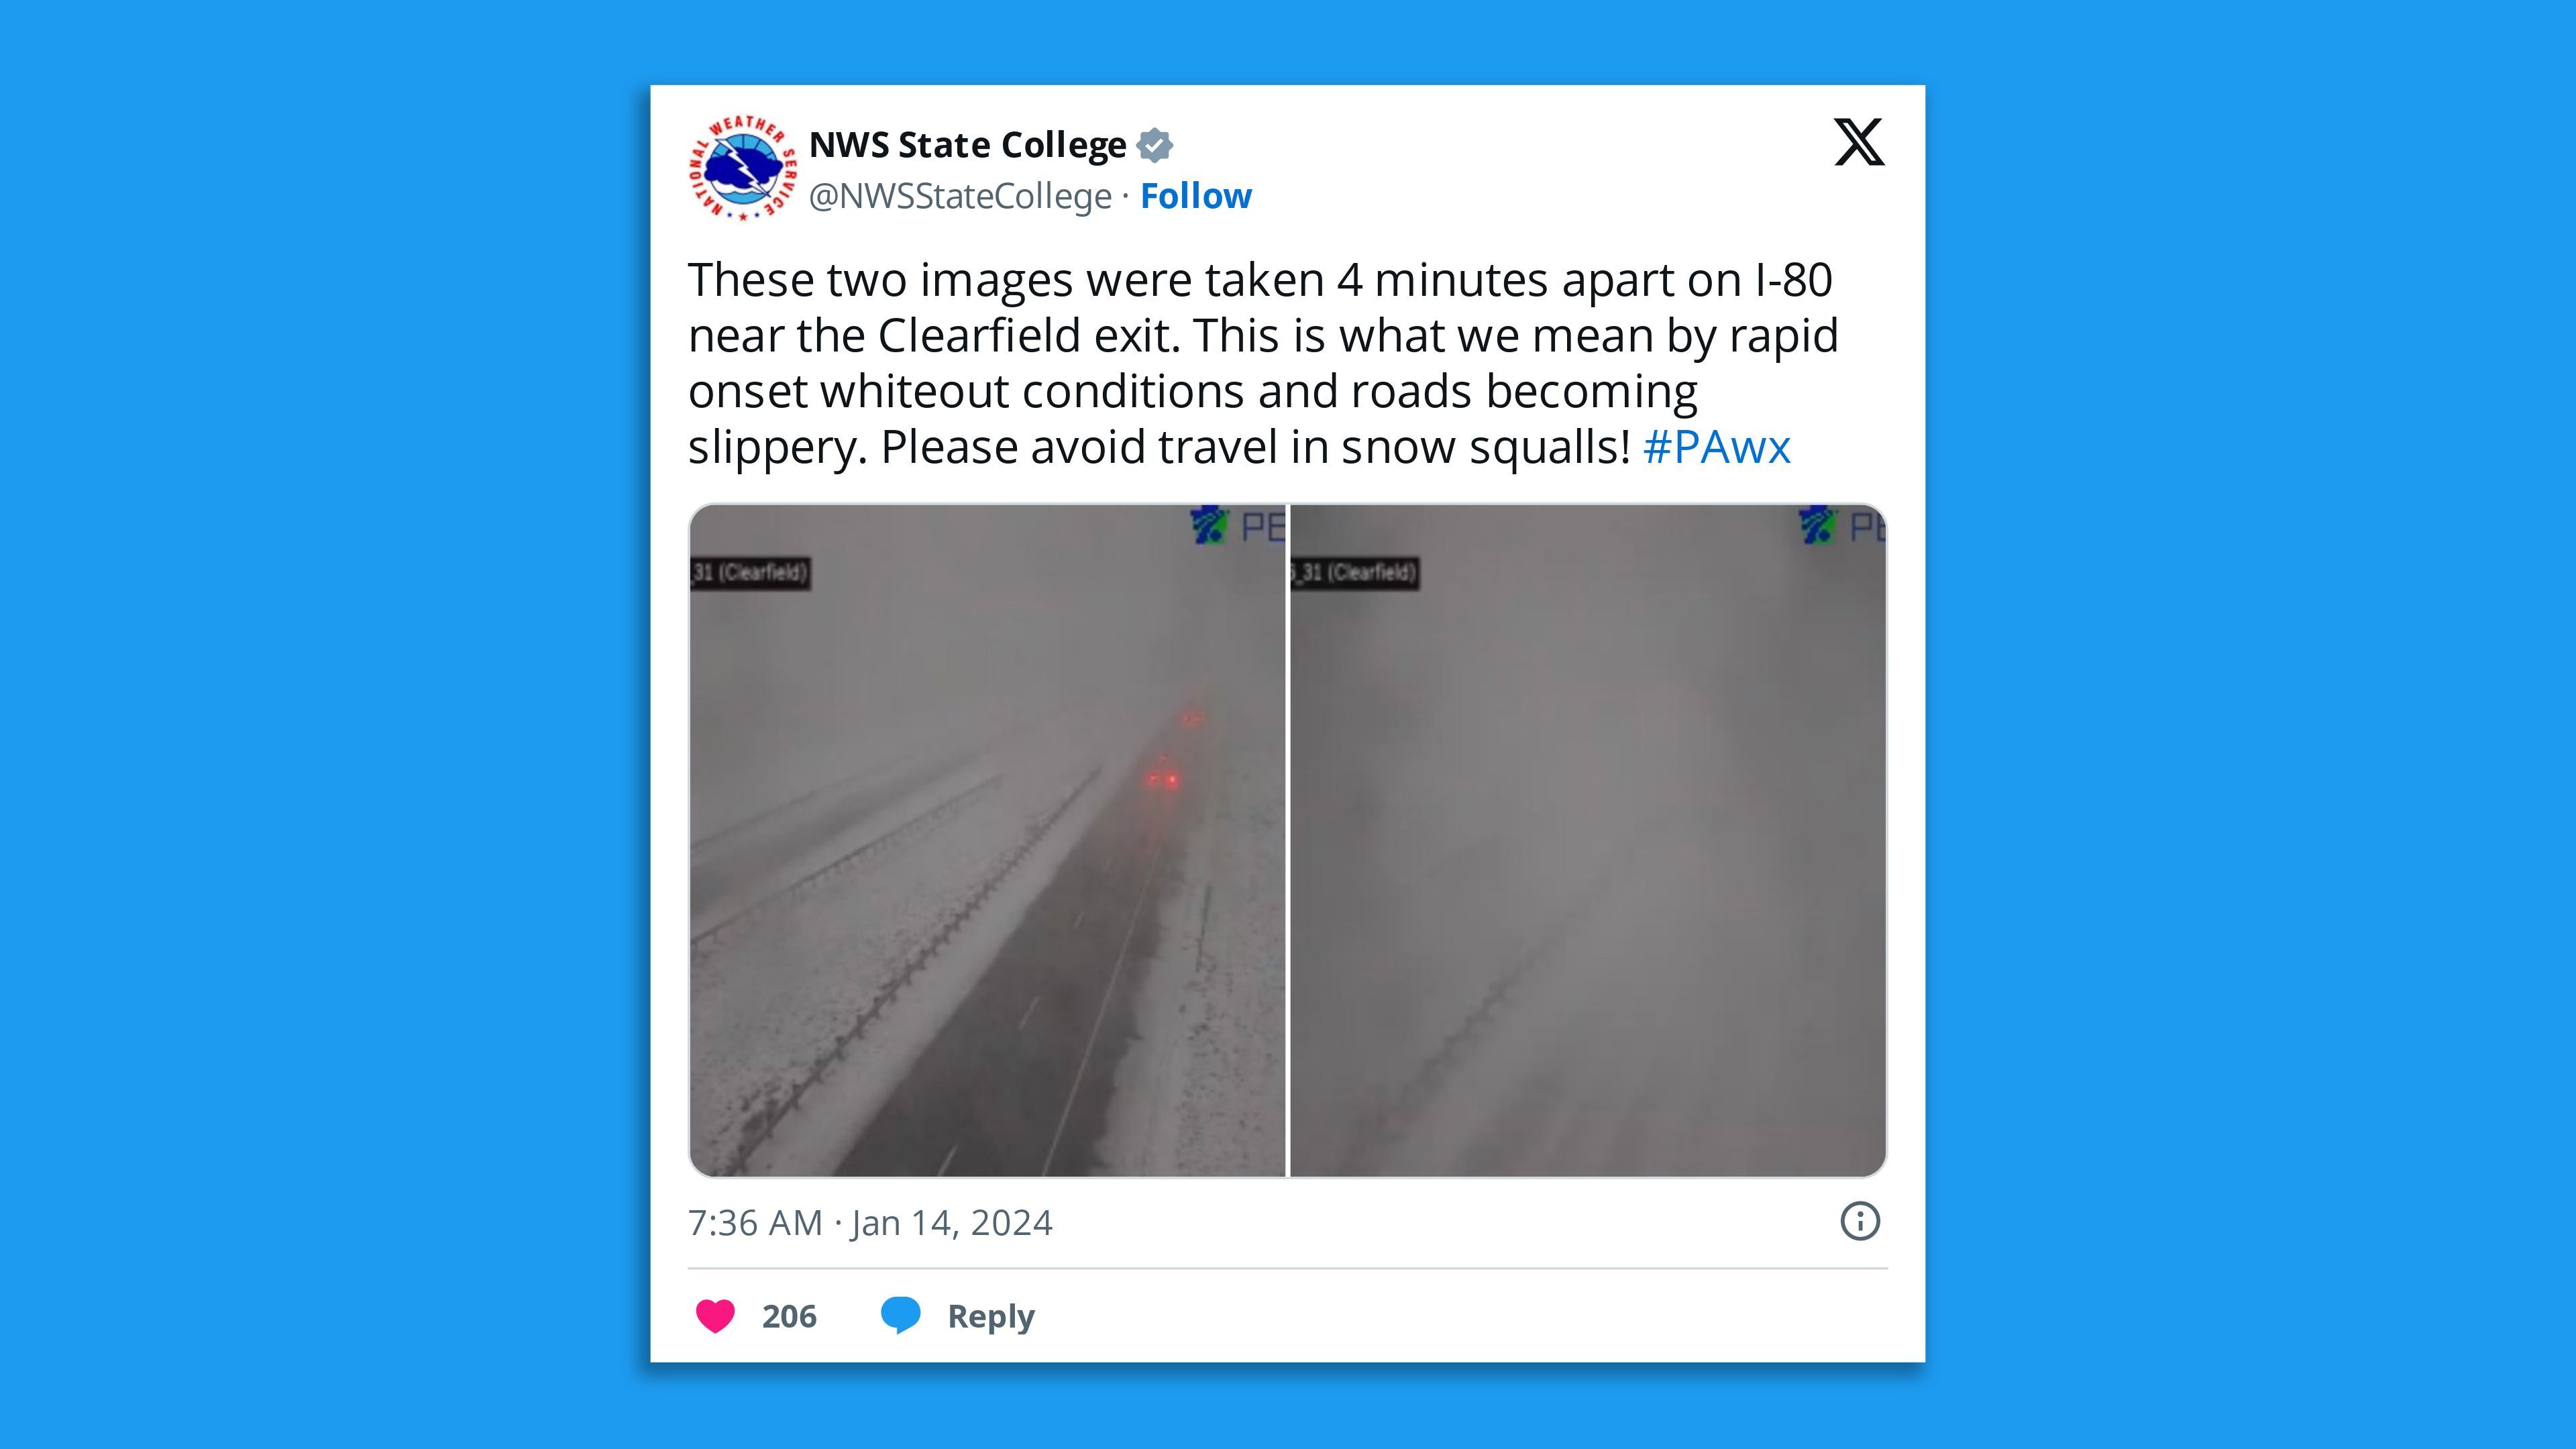 A screenshot of an NWS State College tweet, saying: "These two images were taken 4 minutes apart on I-80 near the Clearfield exit. This is what we mean by rapid onset whiteout conditions and roads becoming slippery. Please avoid travel in snow squalls!"